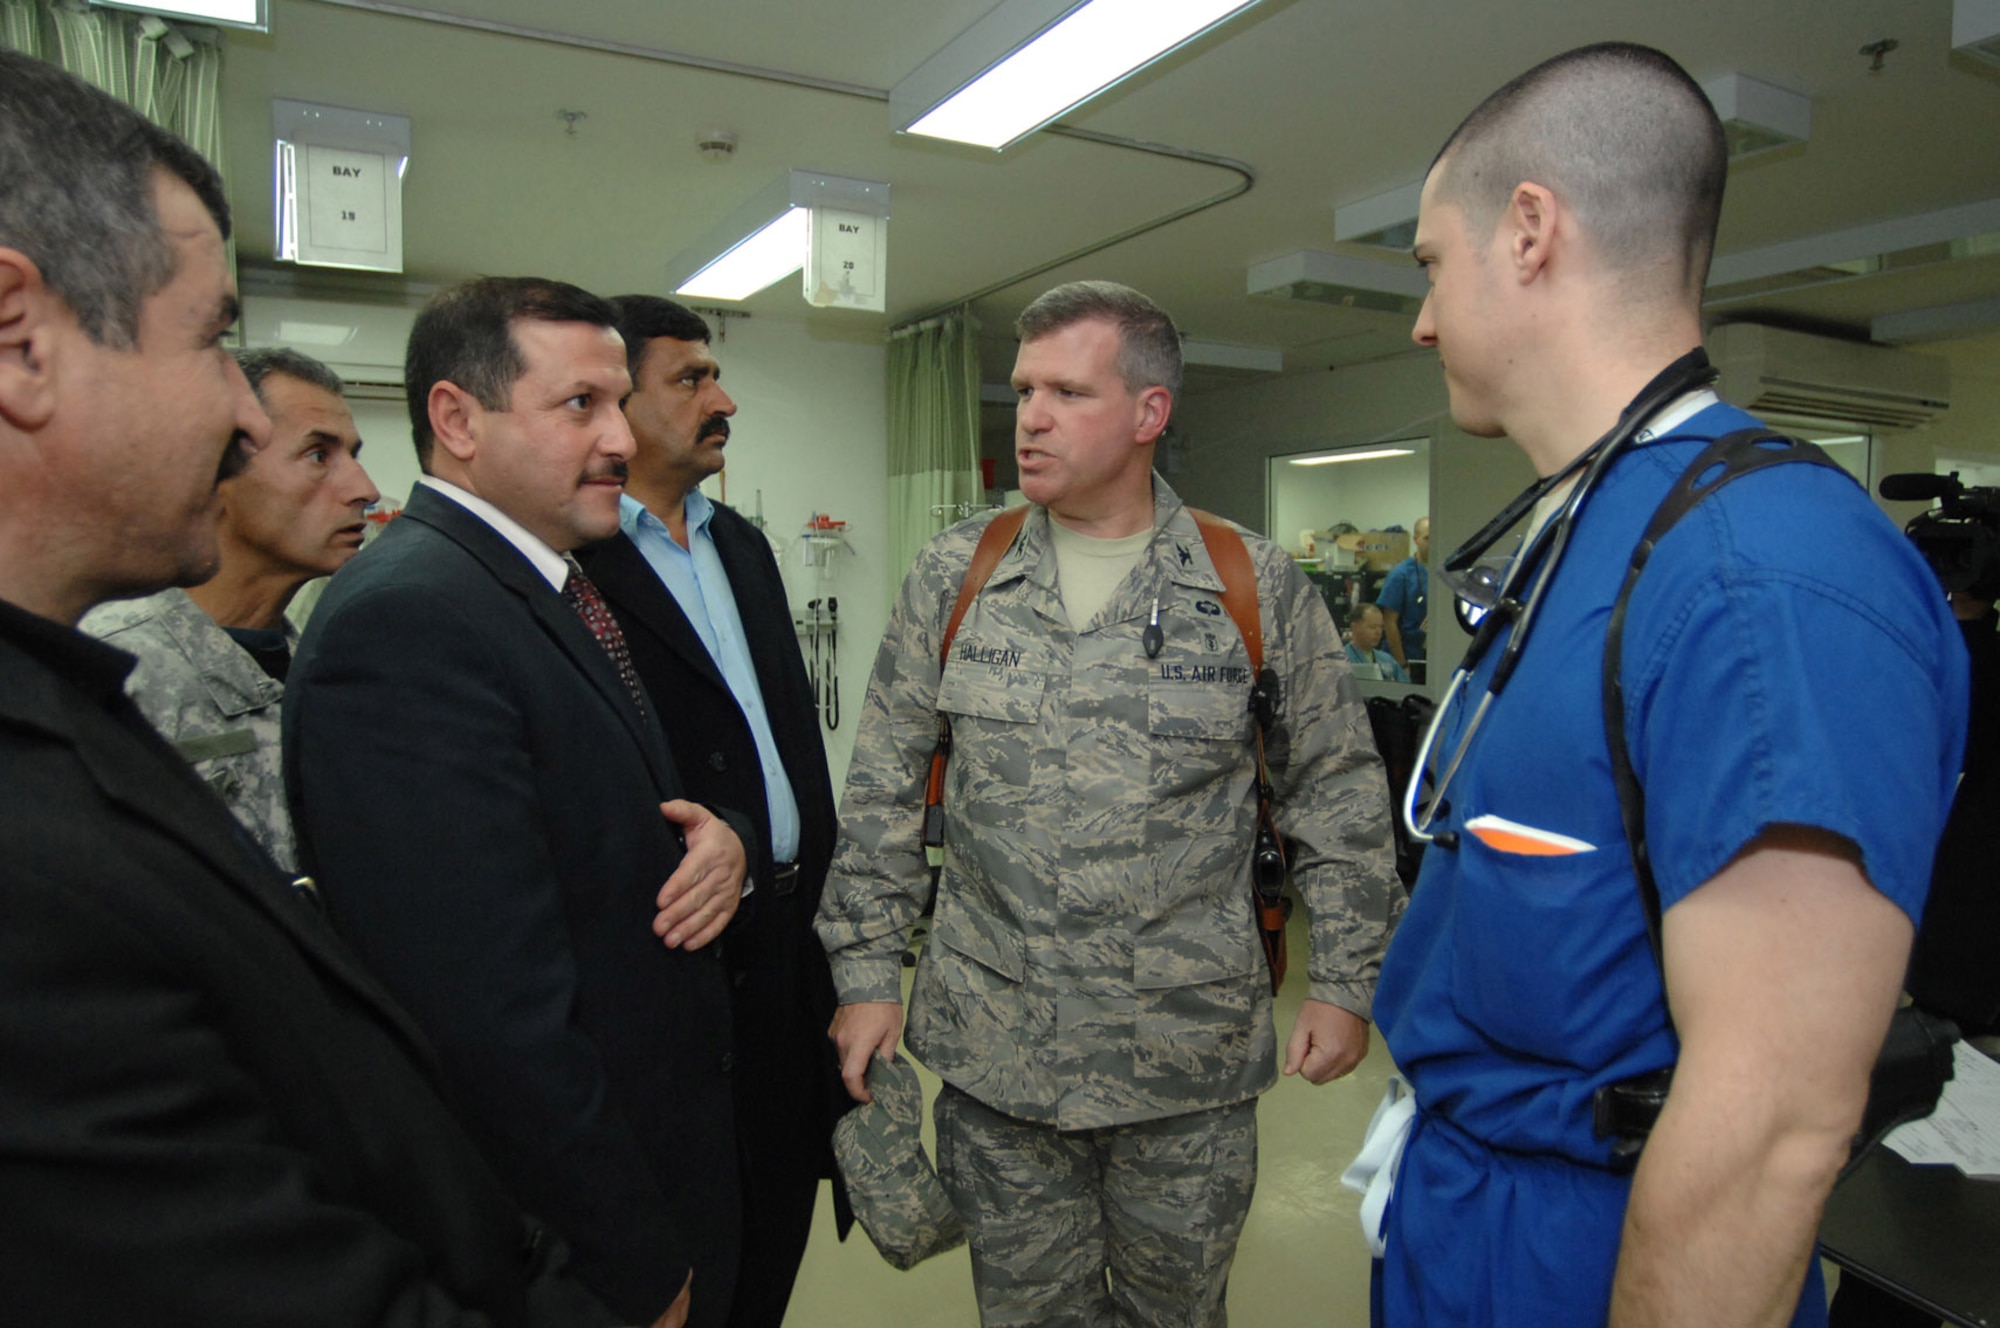 Leaders from the city of Balad, Iraq, meet with Maj. (Dr.) Paul DeFlorio (right)  Feb. 11 at Balad Air Base, Iraq. The doctor oversaw the medical treatment of 20 Iraqi civilians who were transported to the hospital the day before by Army Soldiers after a vehicle-borne improvised explosive device was detonated near the city of Balad. The Iraqi leaders were taken to the bedsides of their injured countrymen by Col. Timothy Halligan, the 332nd Expeditionary Medical Group deputy commander (center). Major DeFlorio is the Air Force Theater Hospital emergency department officer in charge. Major DeFlorio and Colonel Halligan are deployed from Lackland Air Force Base, Texas. (U.S. Air Force photo/Senior Airman Julianne Showalter) 
